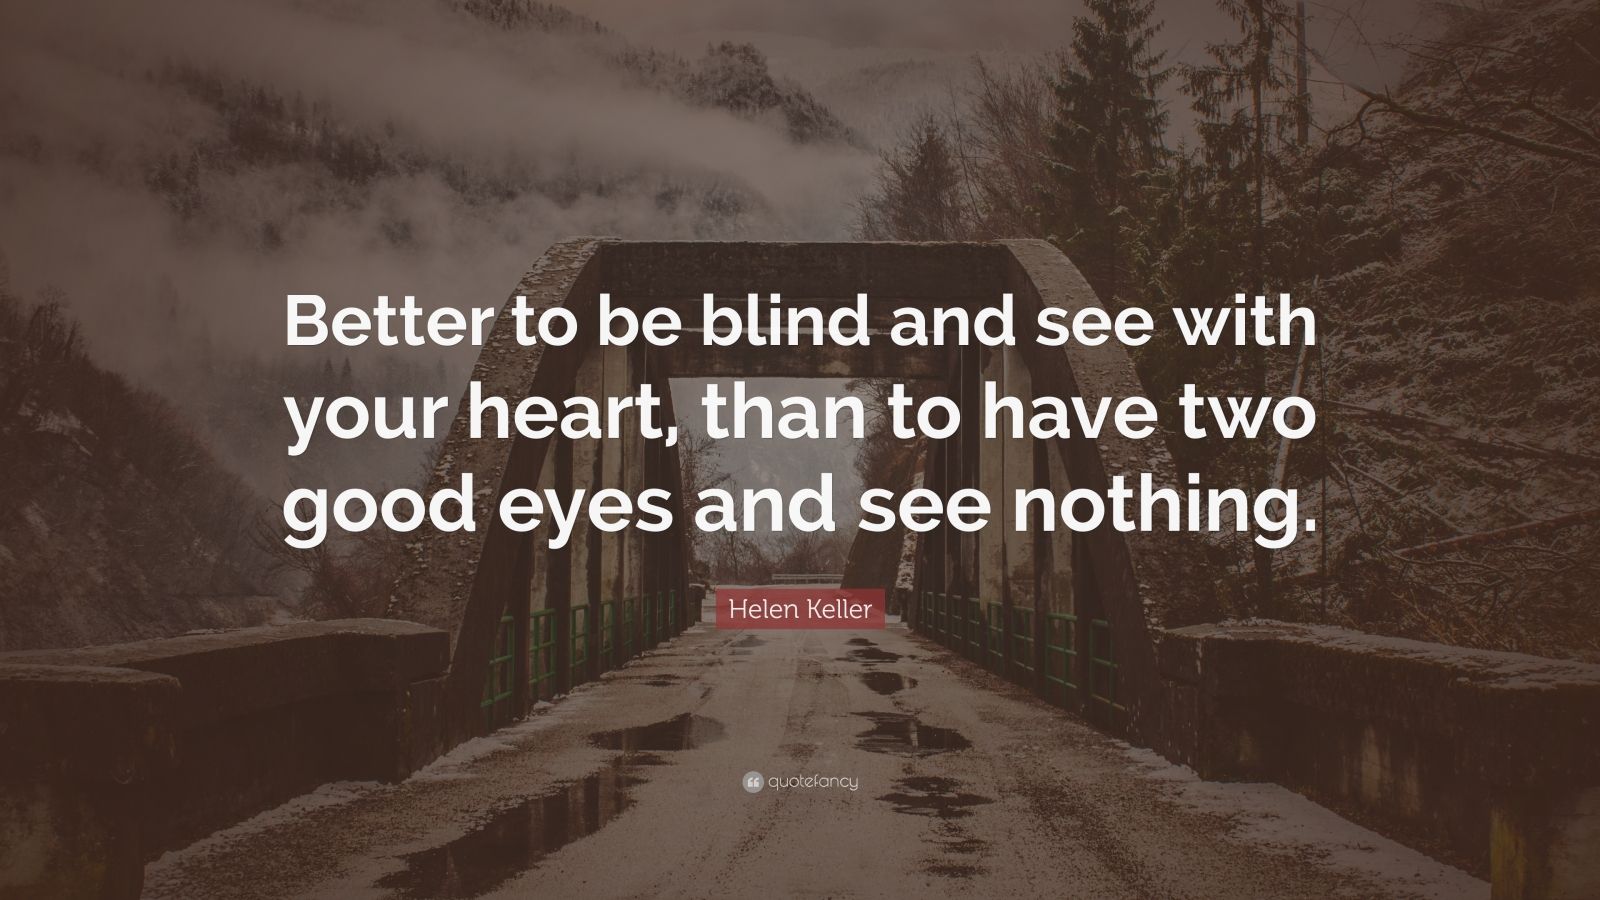 Helen Keller Quote: “Better to be blind and see with your heart, than ...